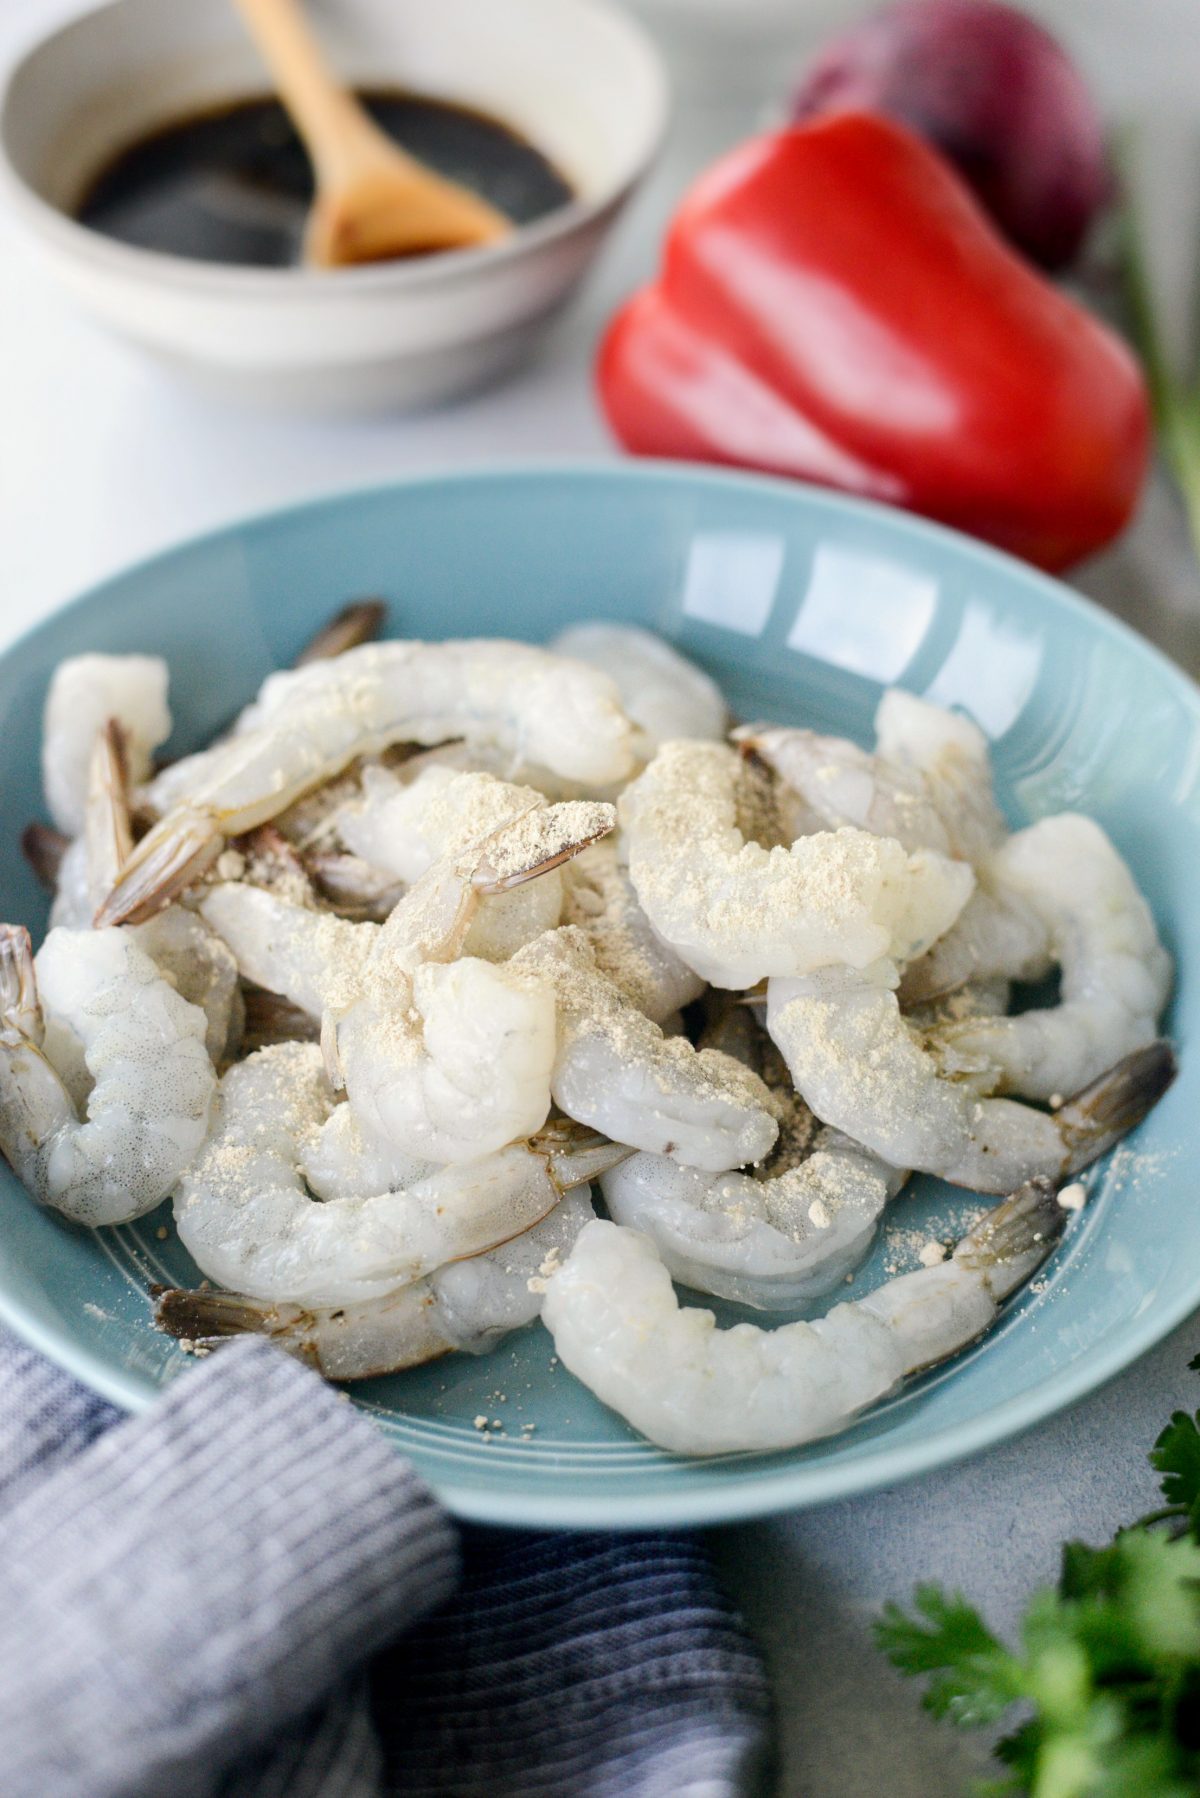 shrimp in blue bowl with white pepper